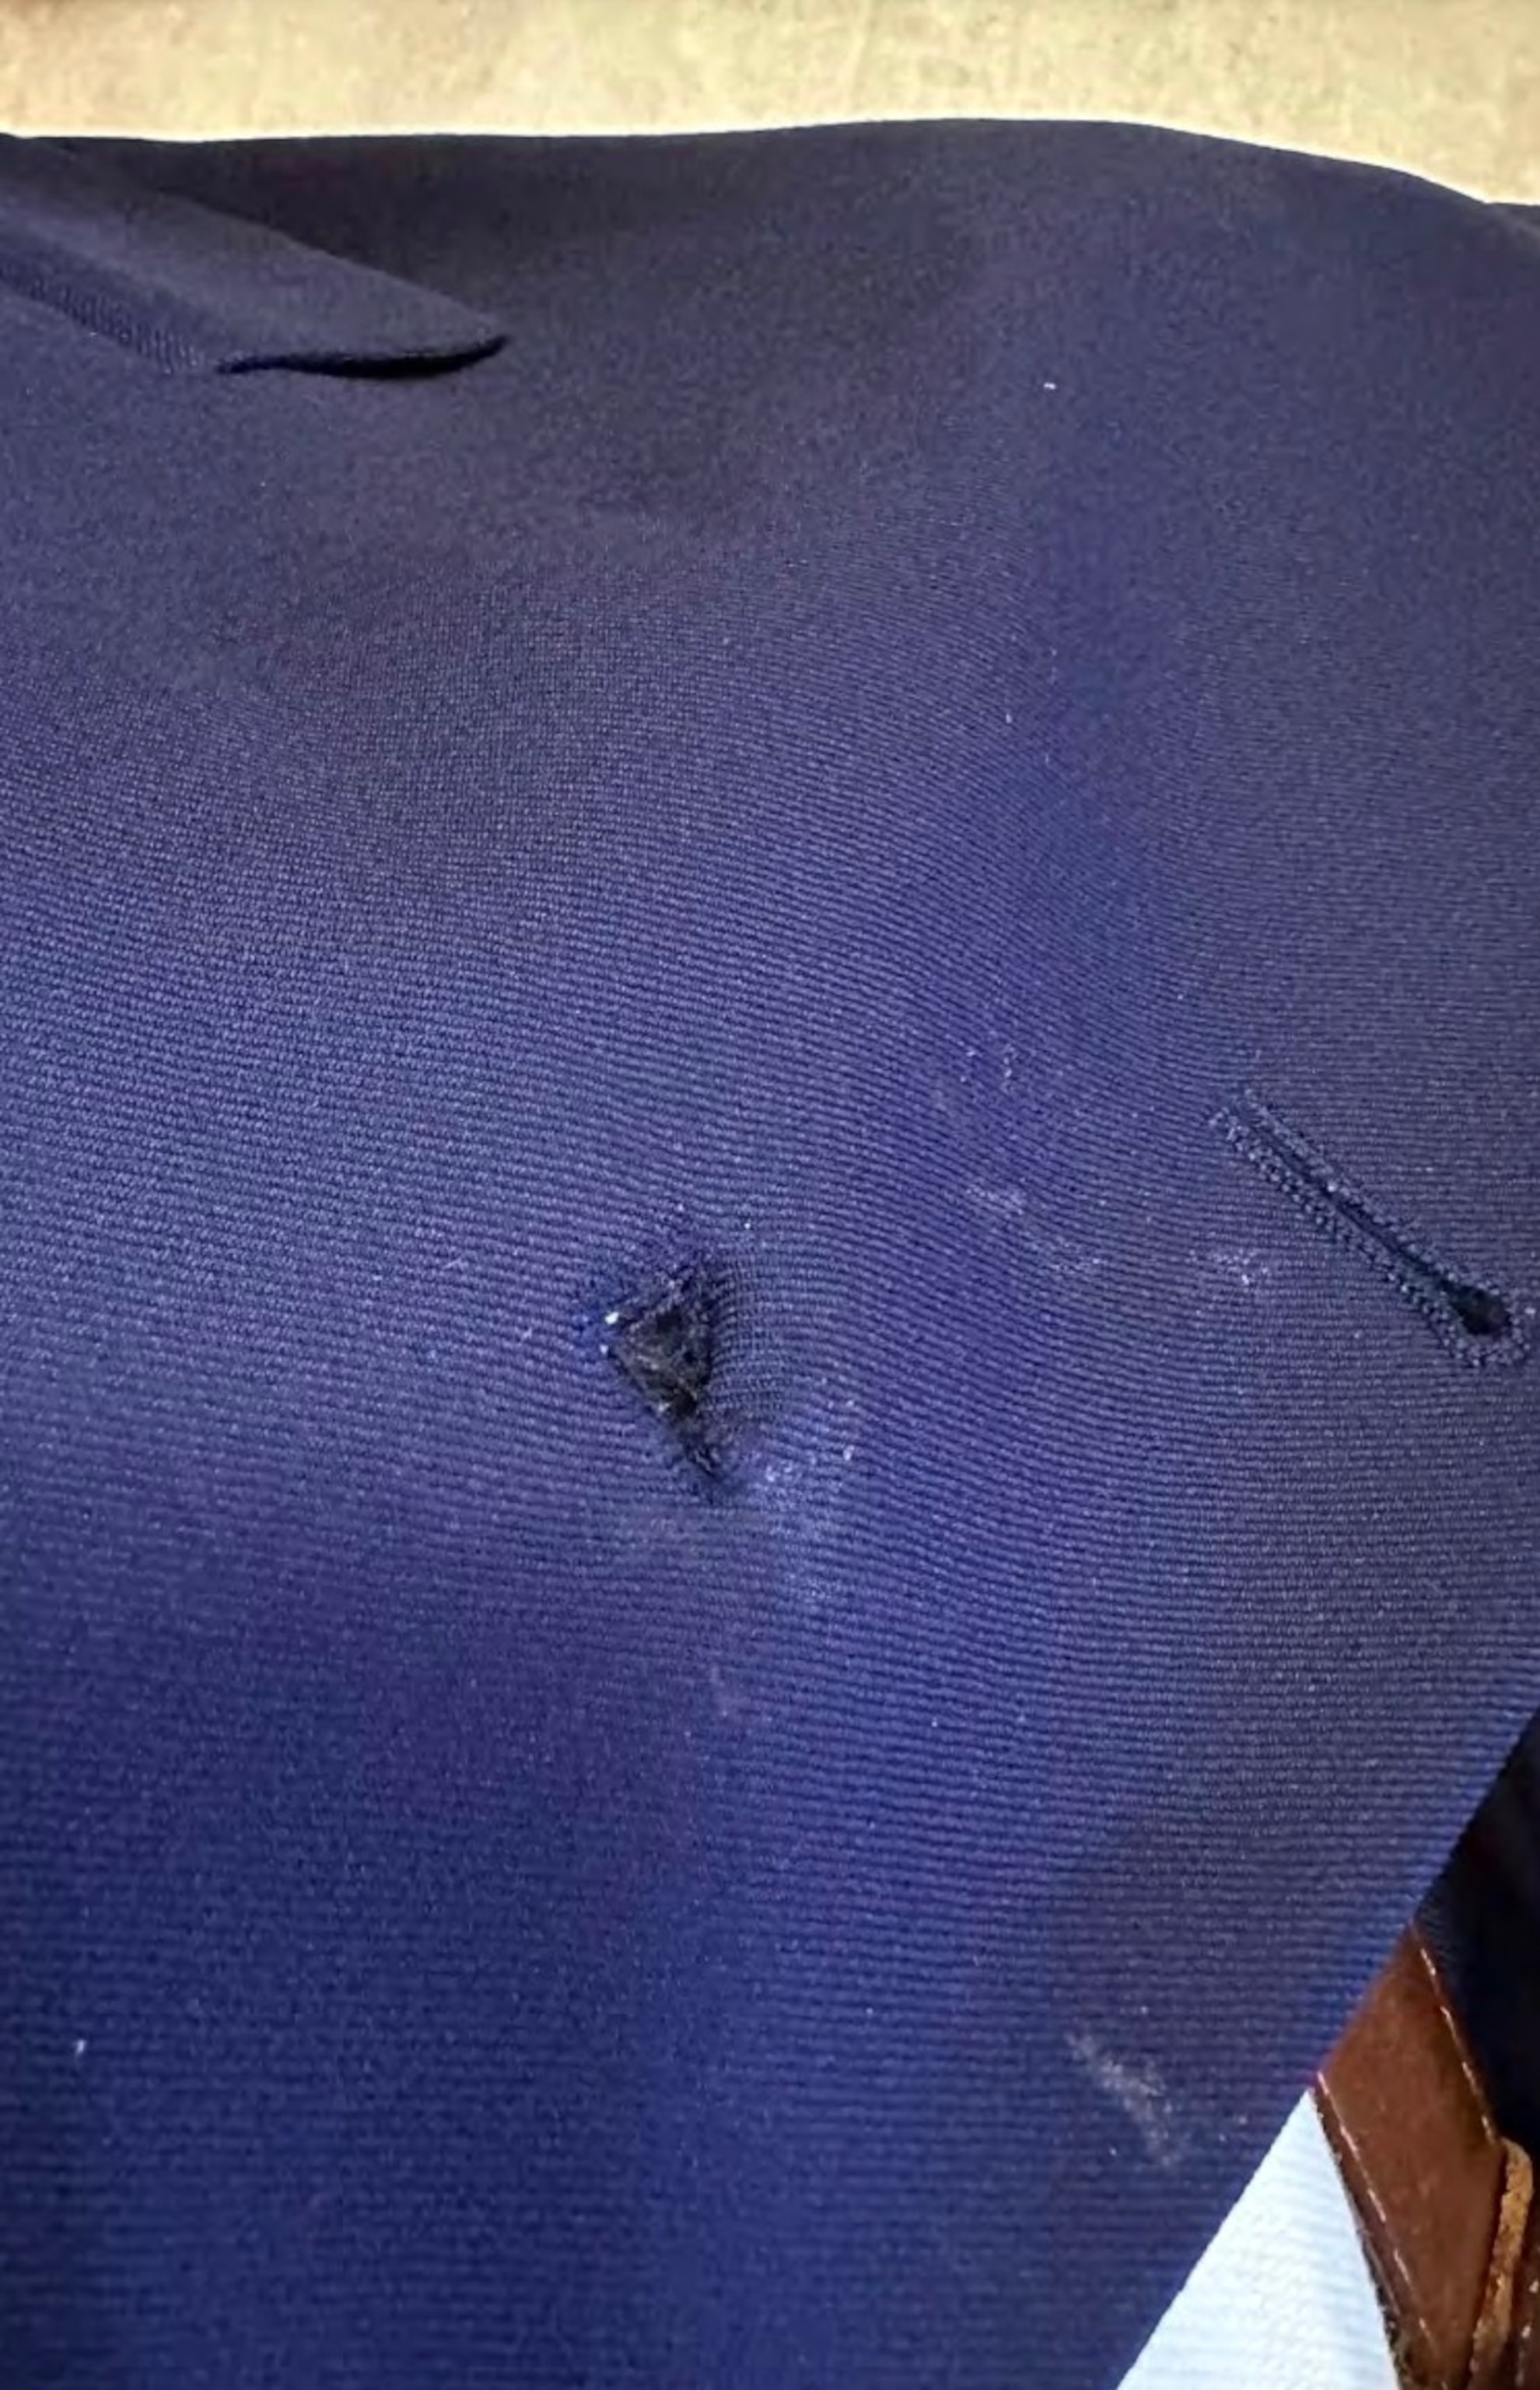 PHOTO: In a photo from a FOIA document acquired by Judicial Watch, an unnamed U.S. Secret Service agent's coat is shown with bite marks on it from a Commander Biden biting incident on Sept. 12, 2023.